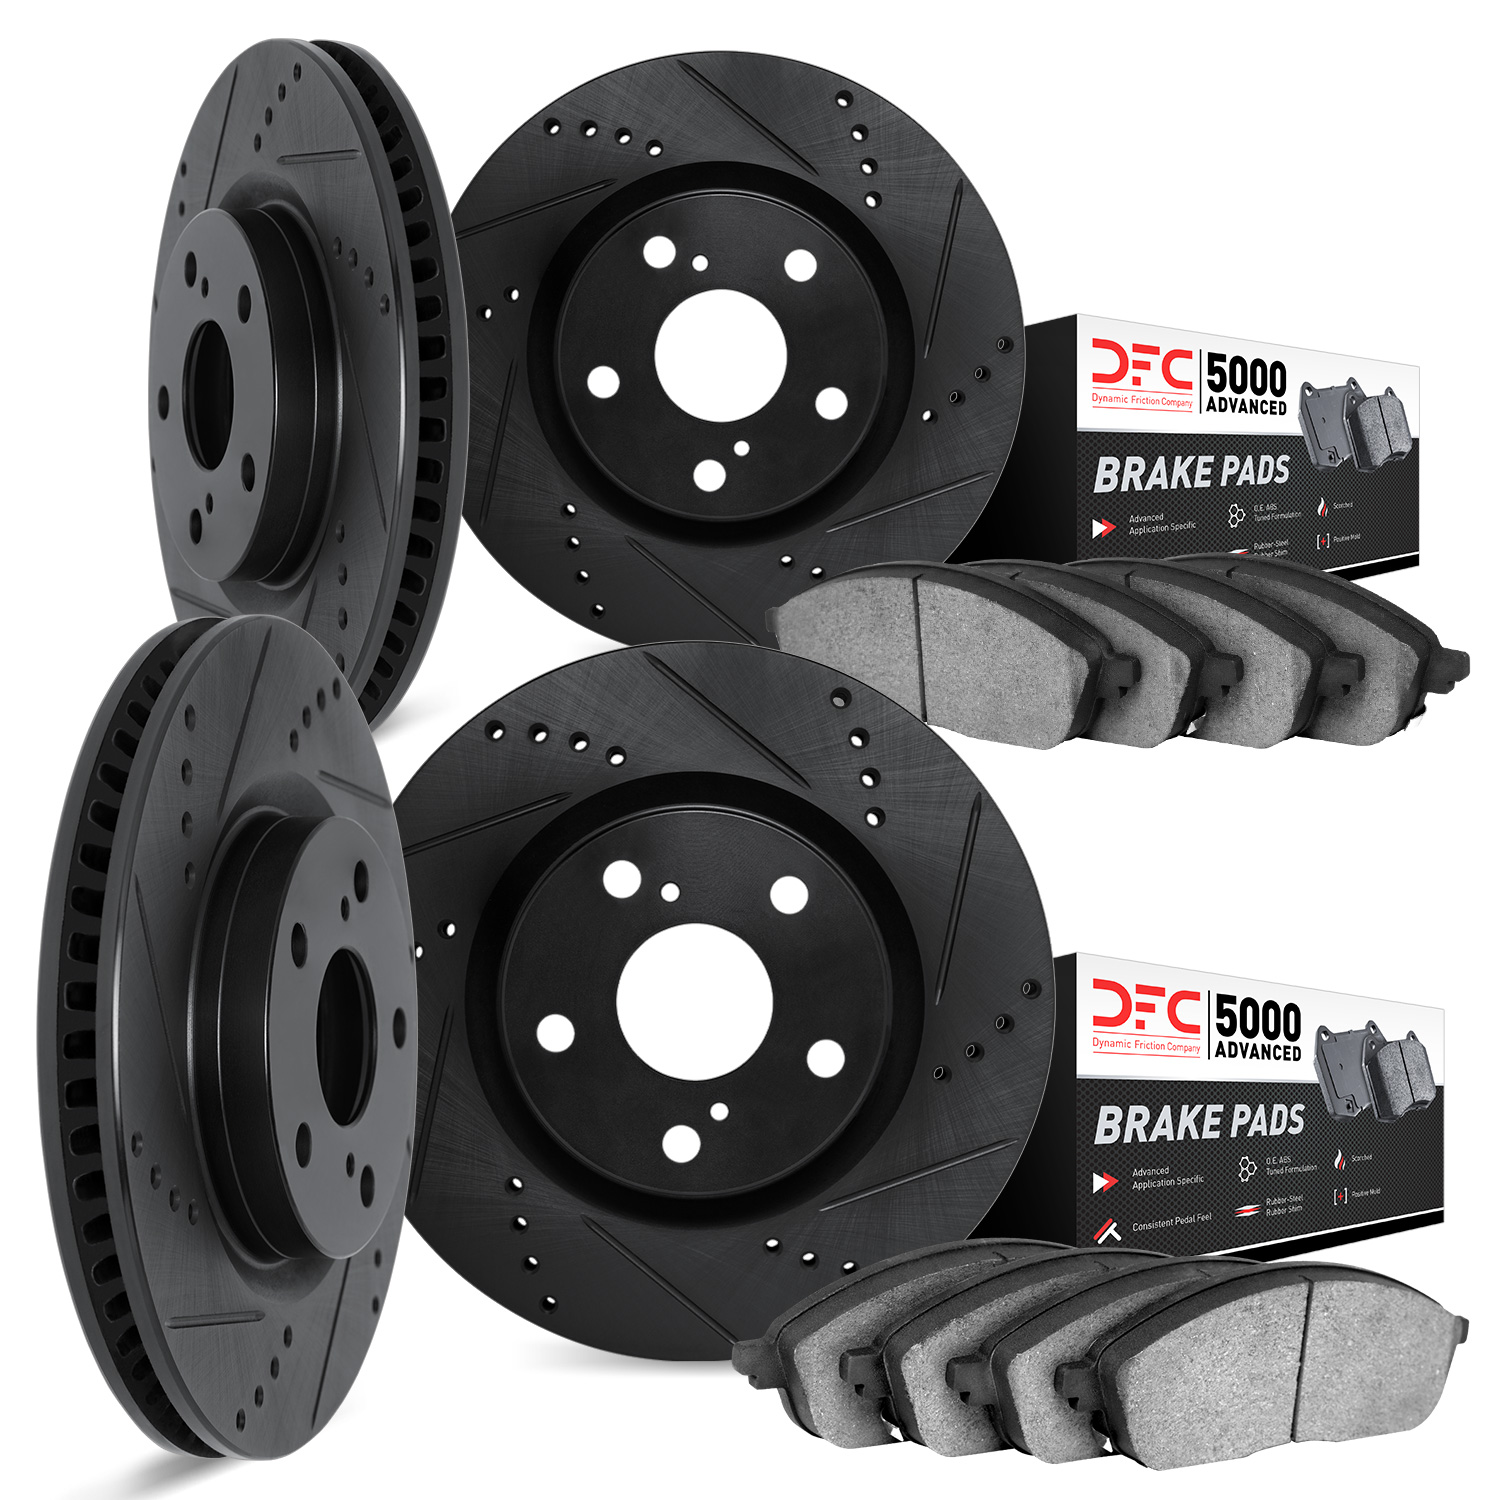 8504-75025 Drilled/Slotted Brake Rotors w/5000 Advanced Brake Pads Kit [Black], 2018-2021 Lexus/Toyota/Scion, Position: Front an